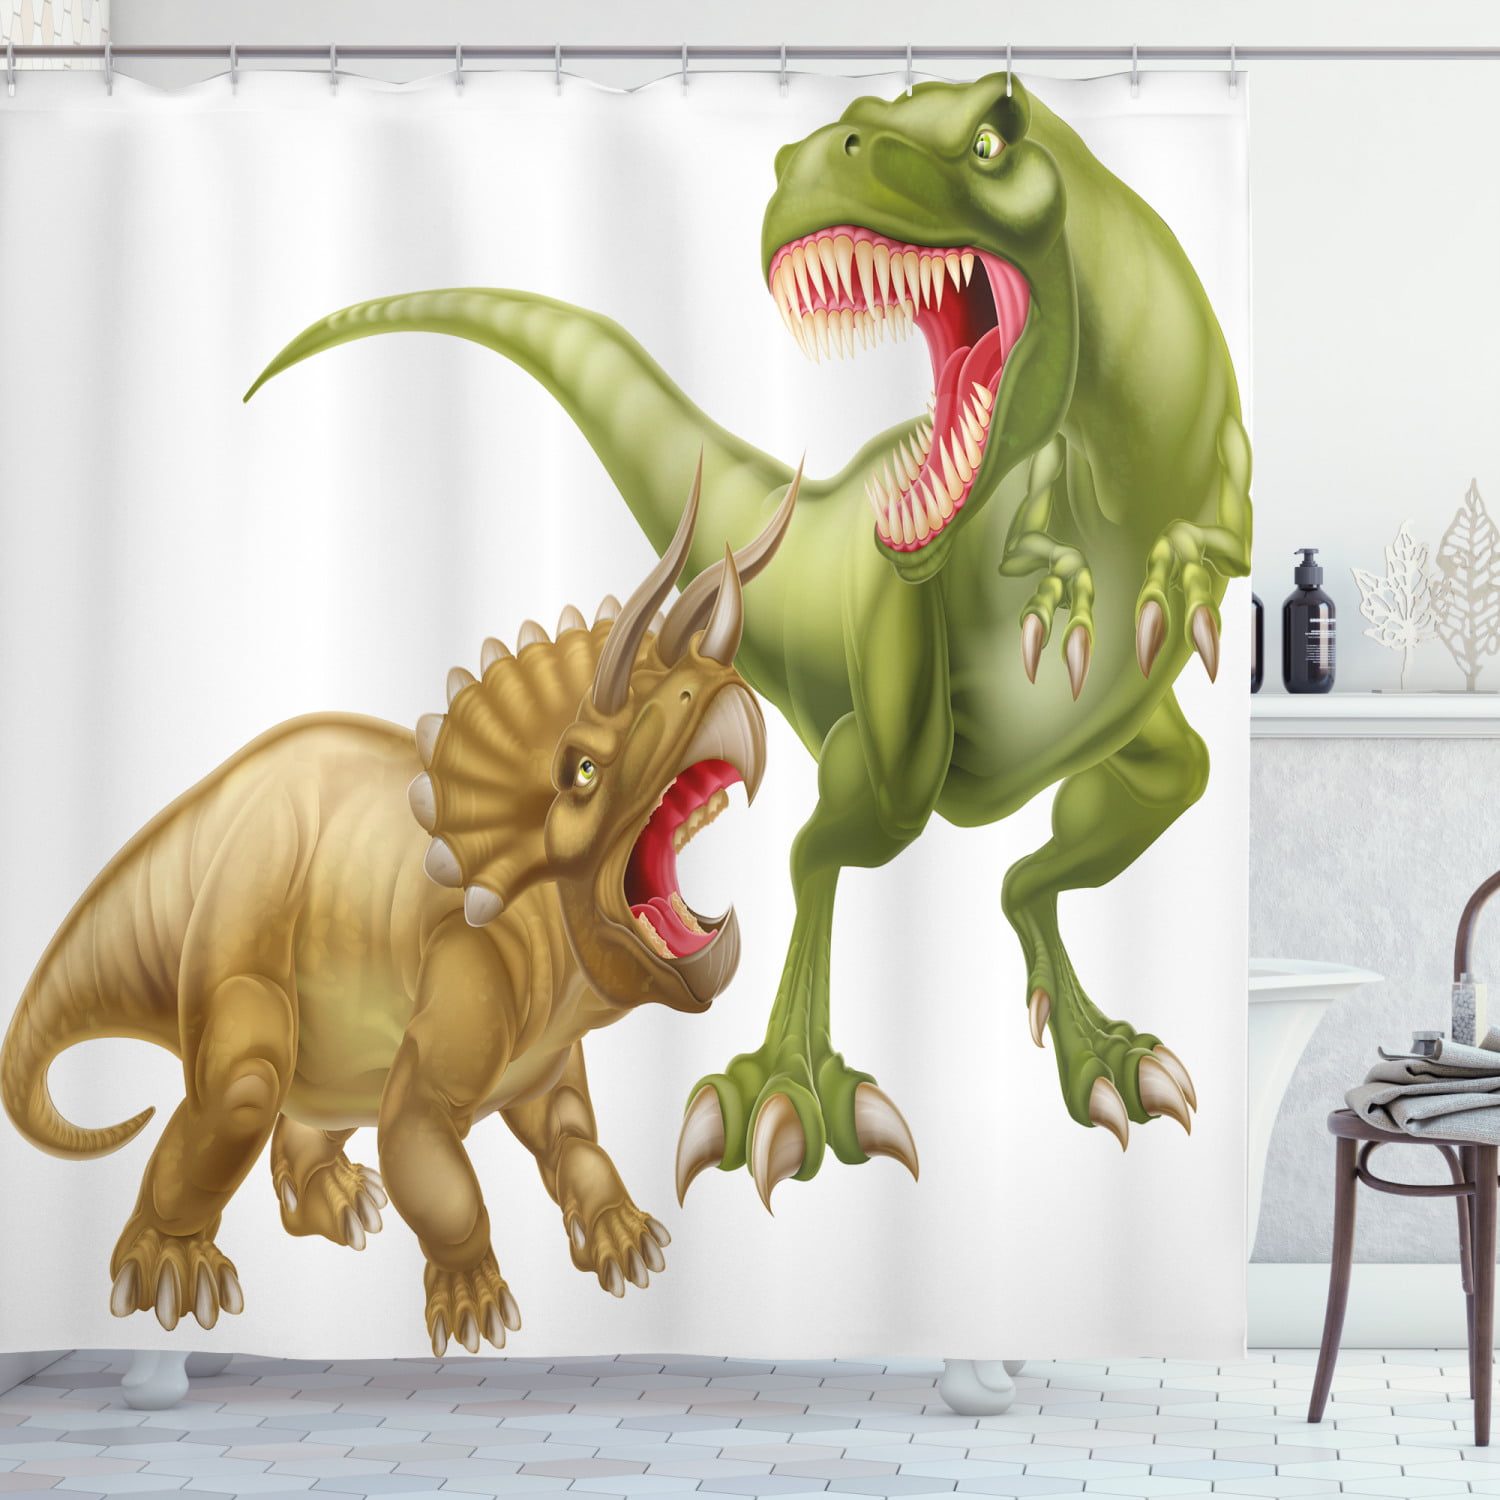 Dinosaur Shower Curtain, T Rex Versus Triceratops Scaring Each Other Wild  Reptiles Dinosaur, Fabric Bathroom Set with Hooks, 69W X 70L Inches, Green  Pink Pale Brown, by Ambesonne 